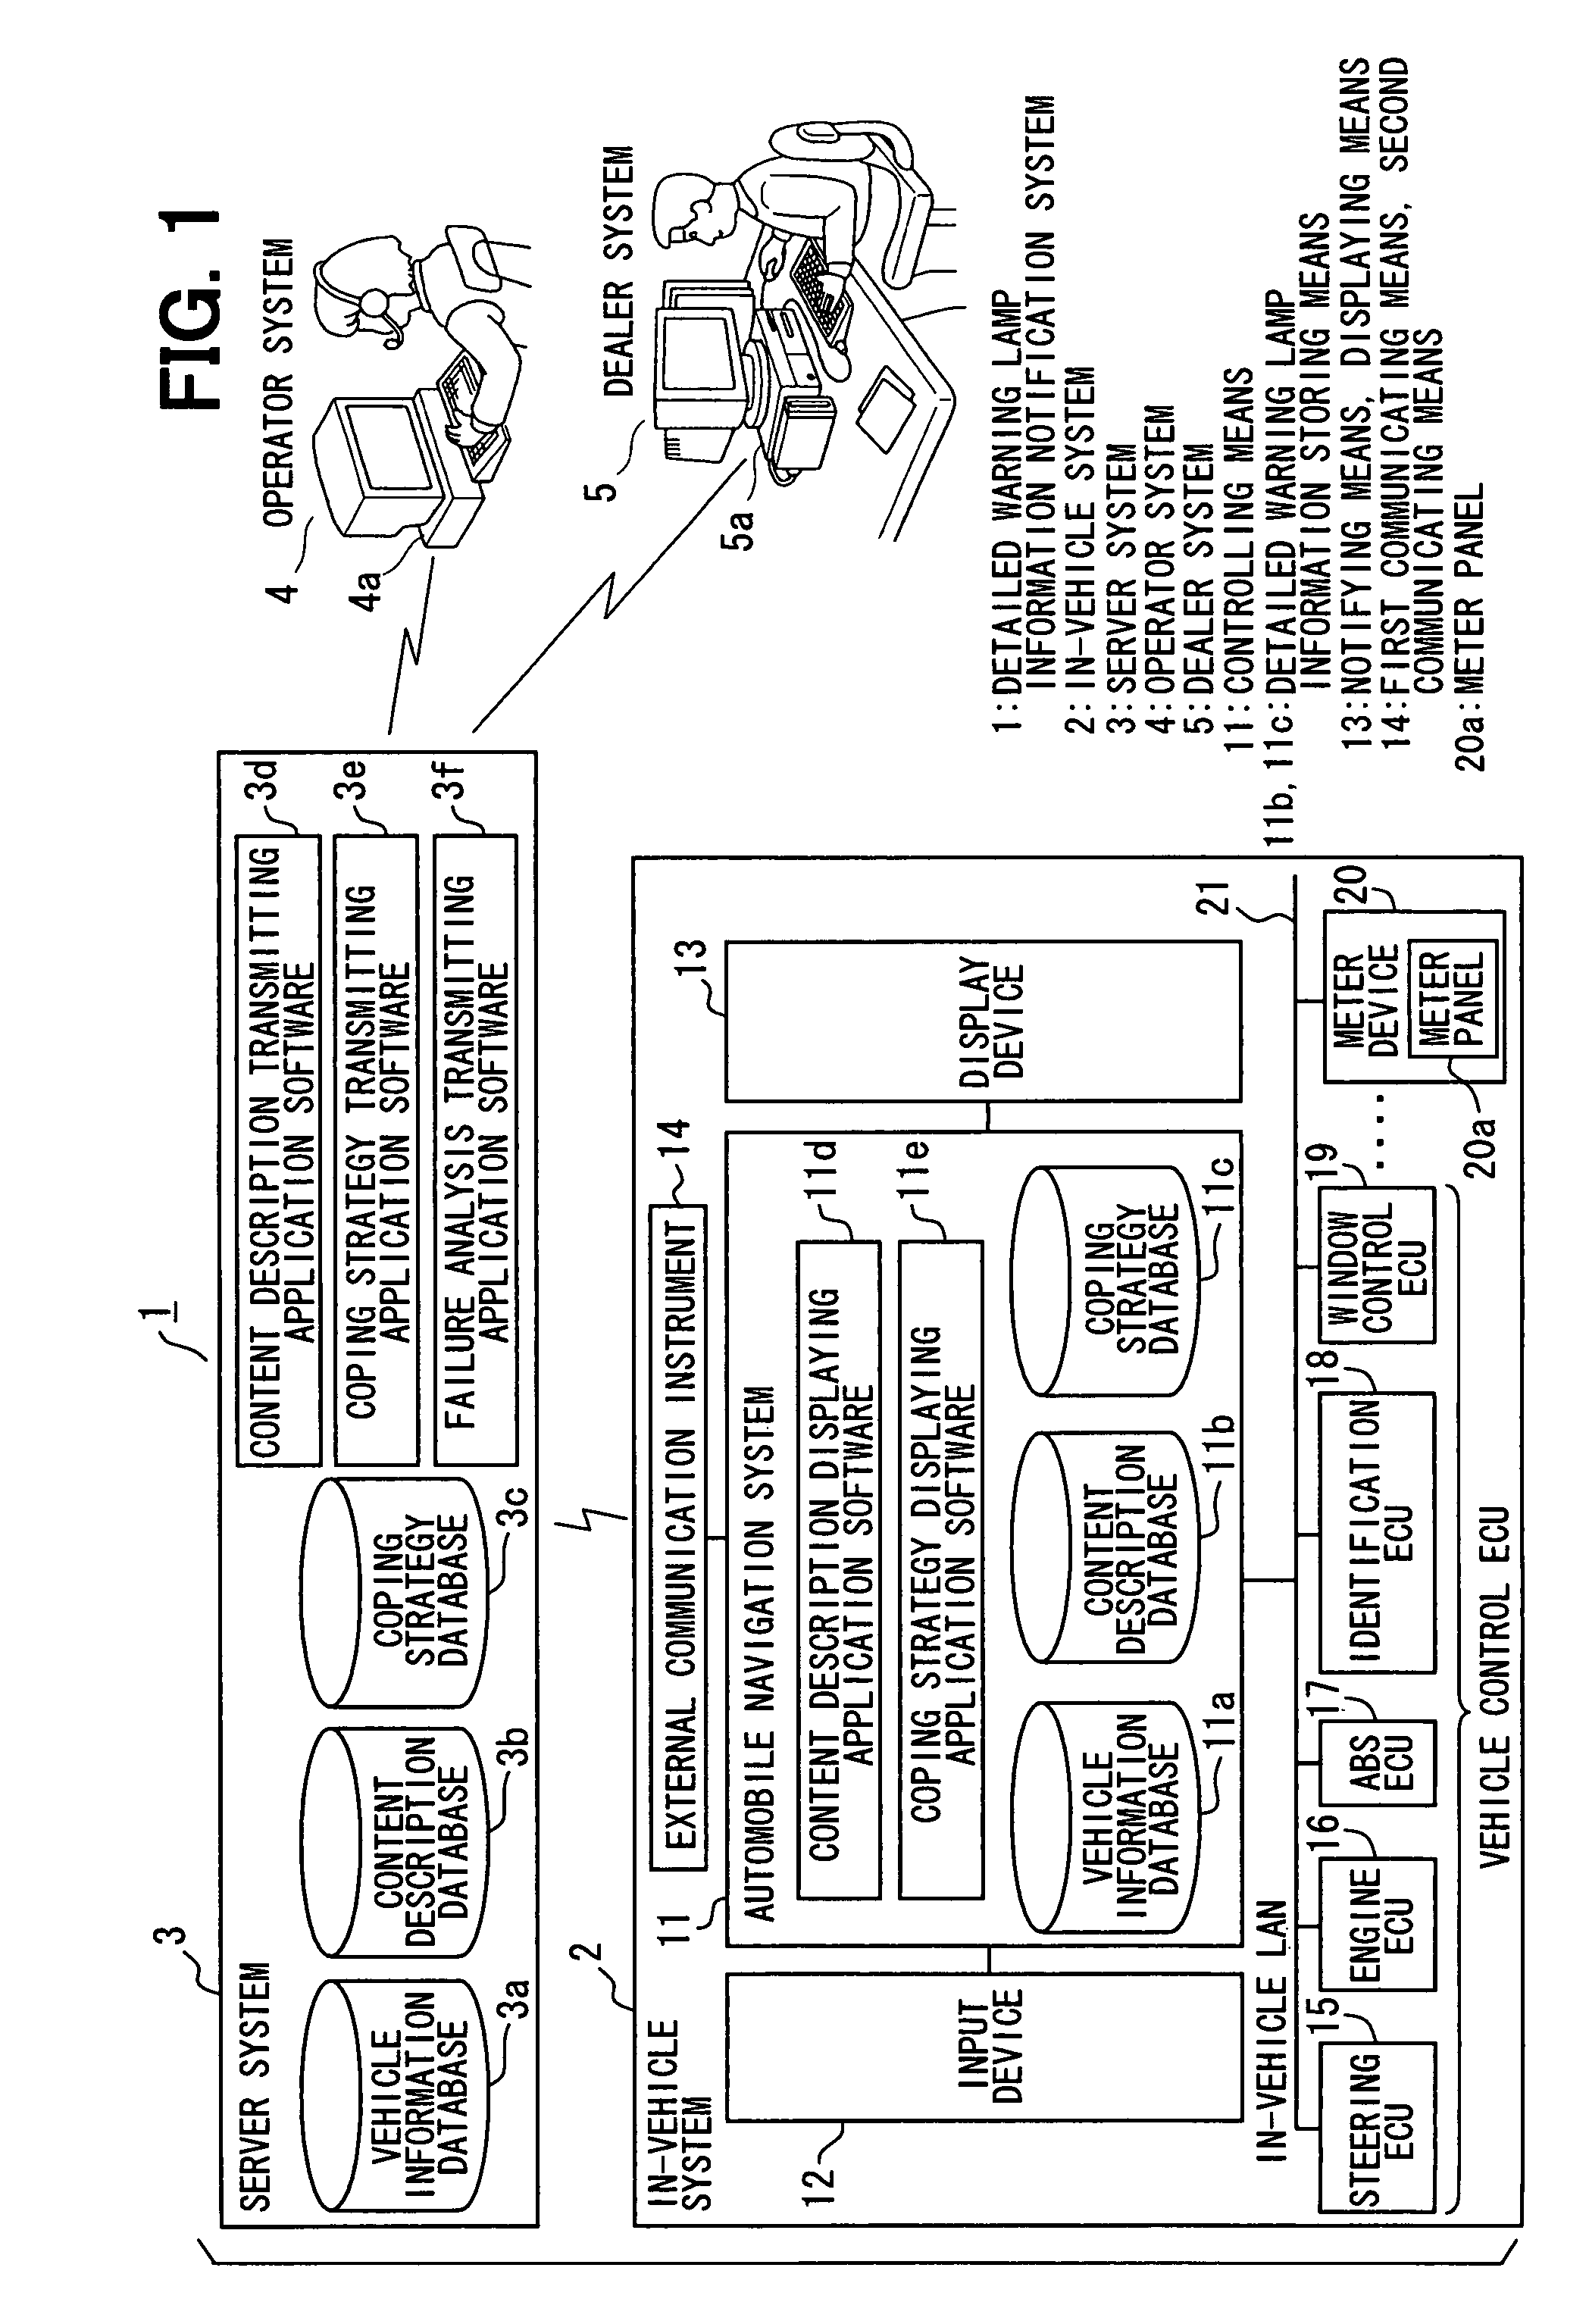 In-vehicle system, detailed warning lamp information notification system, and server system